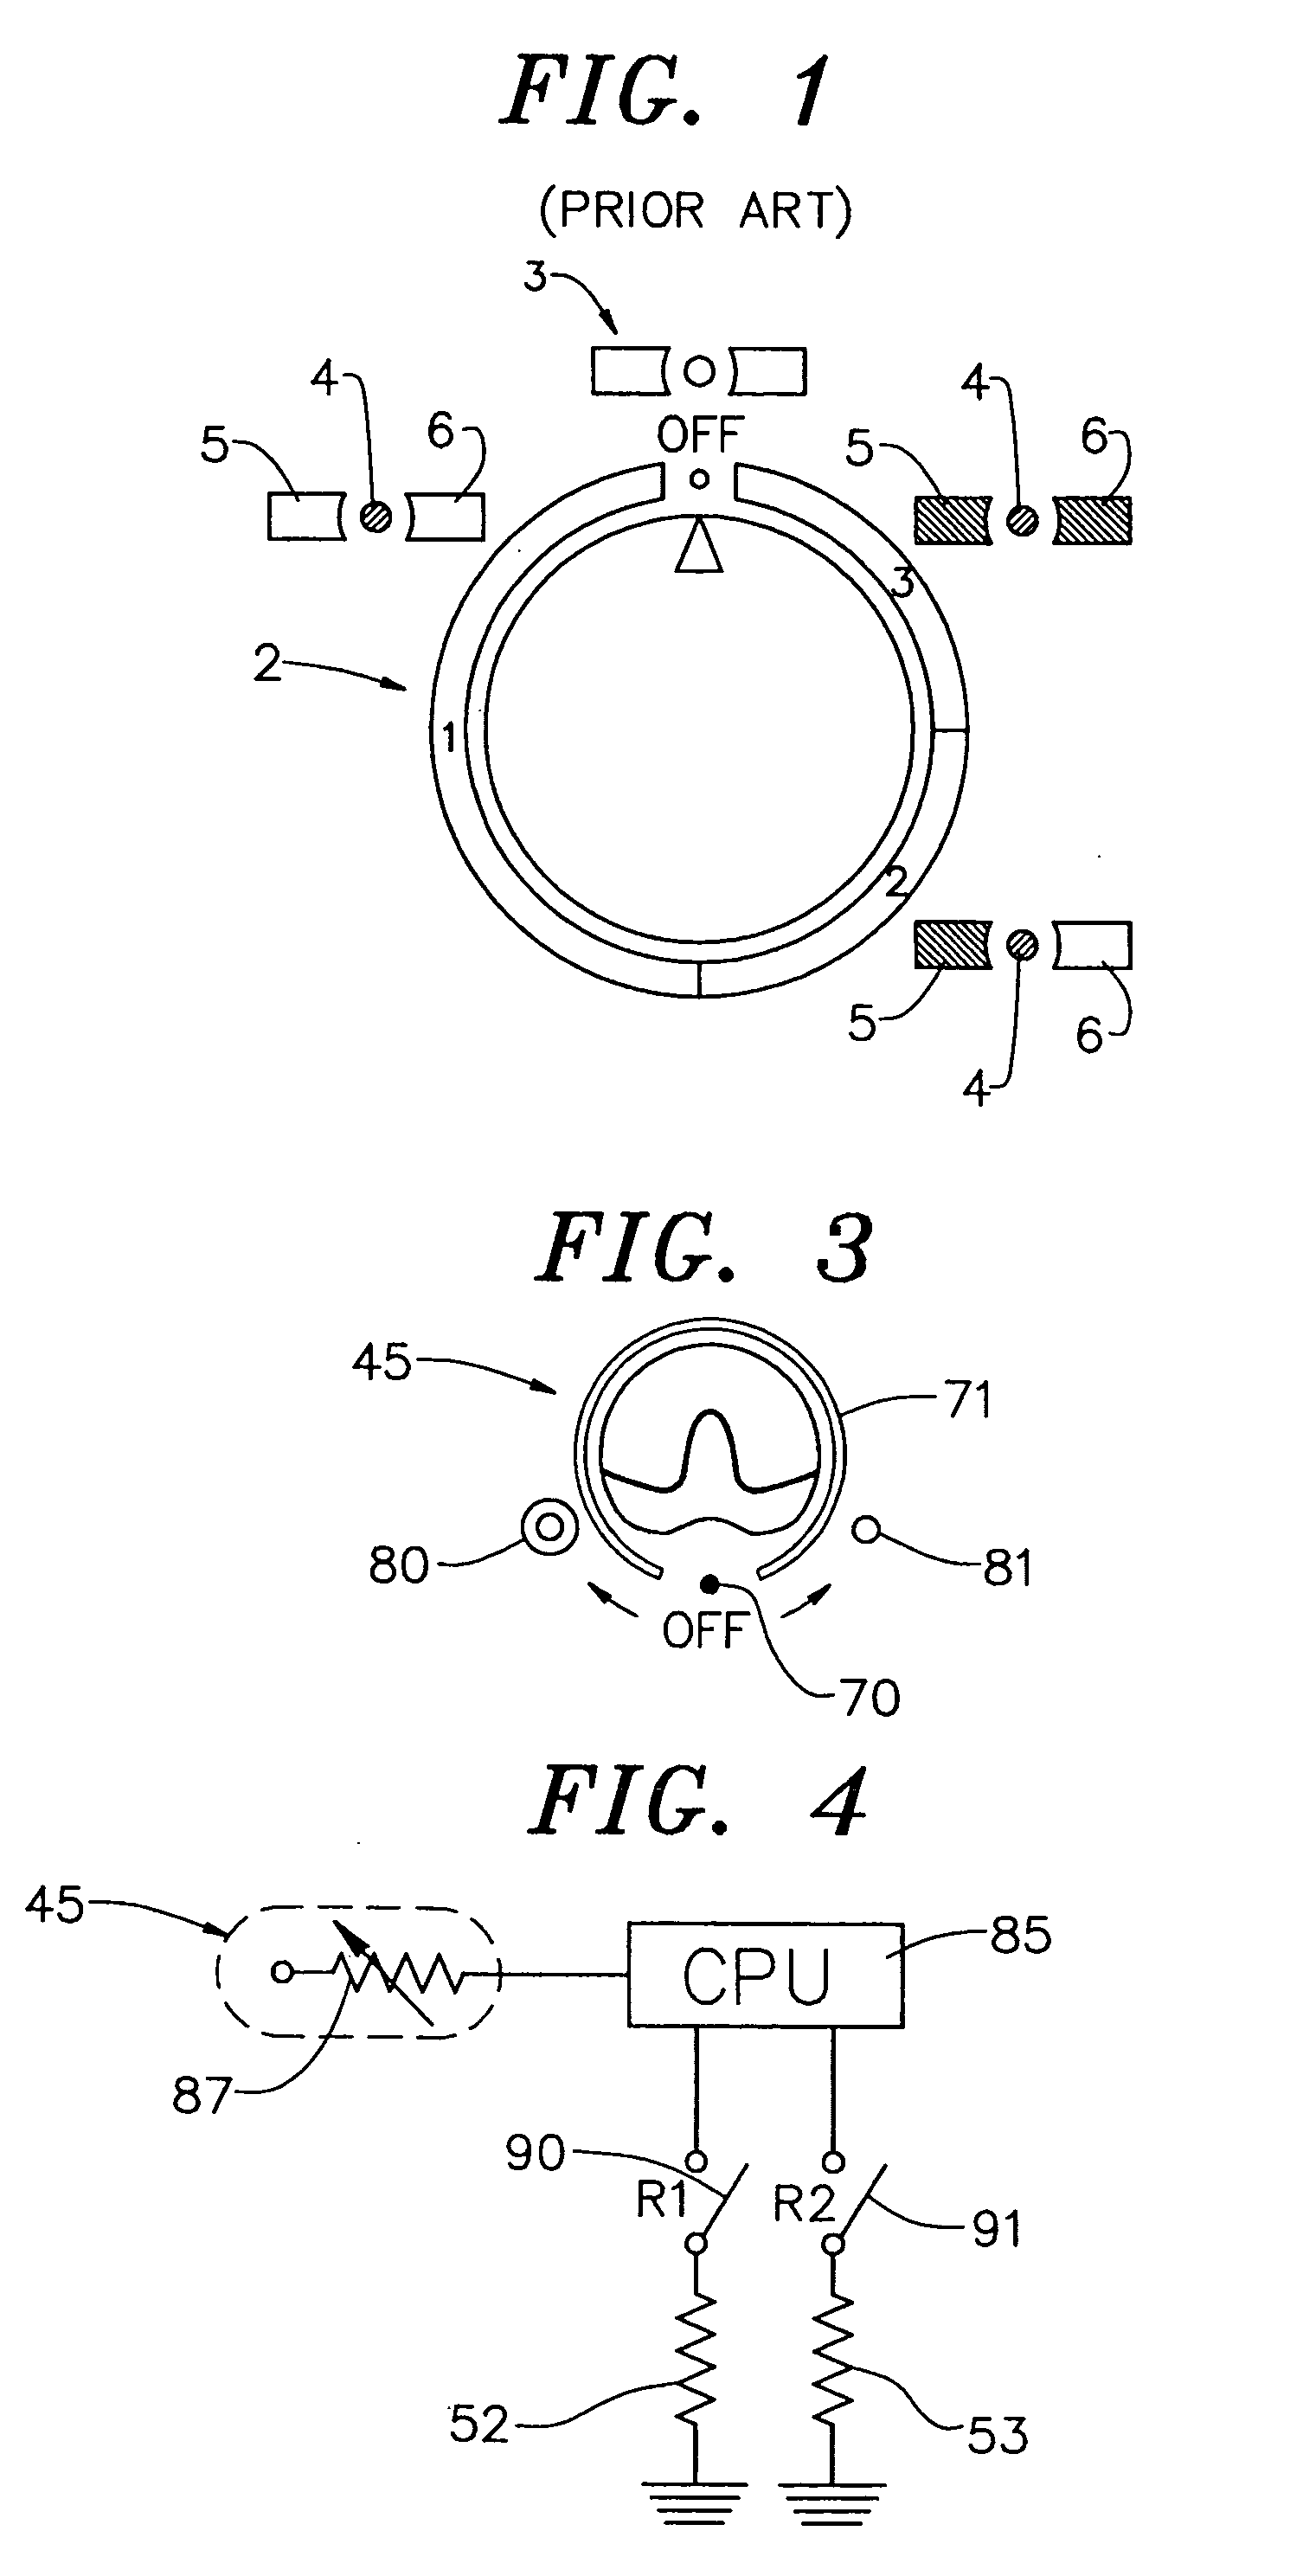 Infinite temperature control for heating element of a cooking appliance